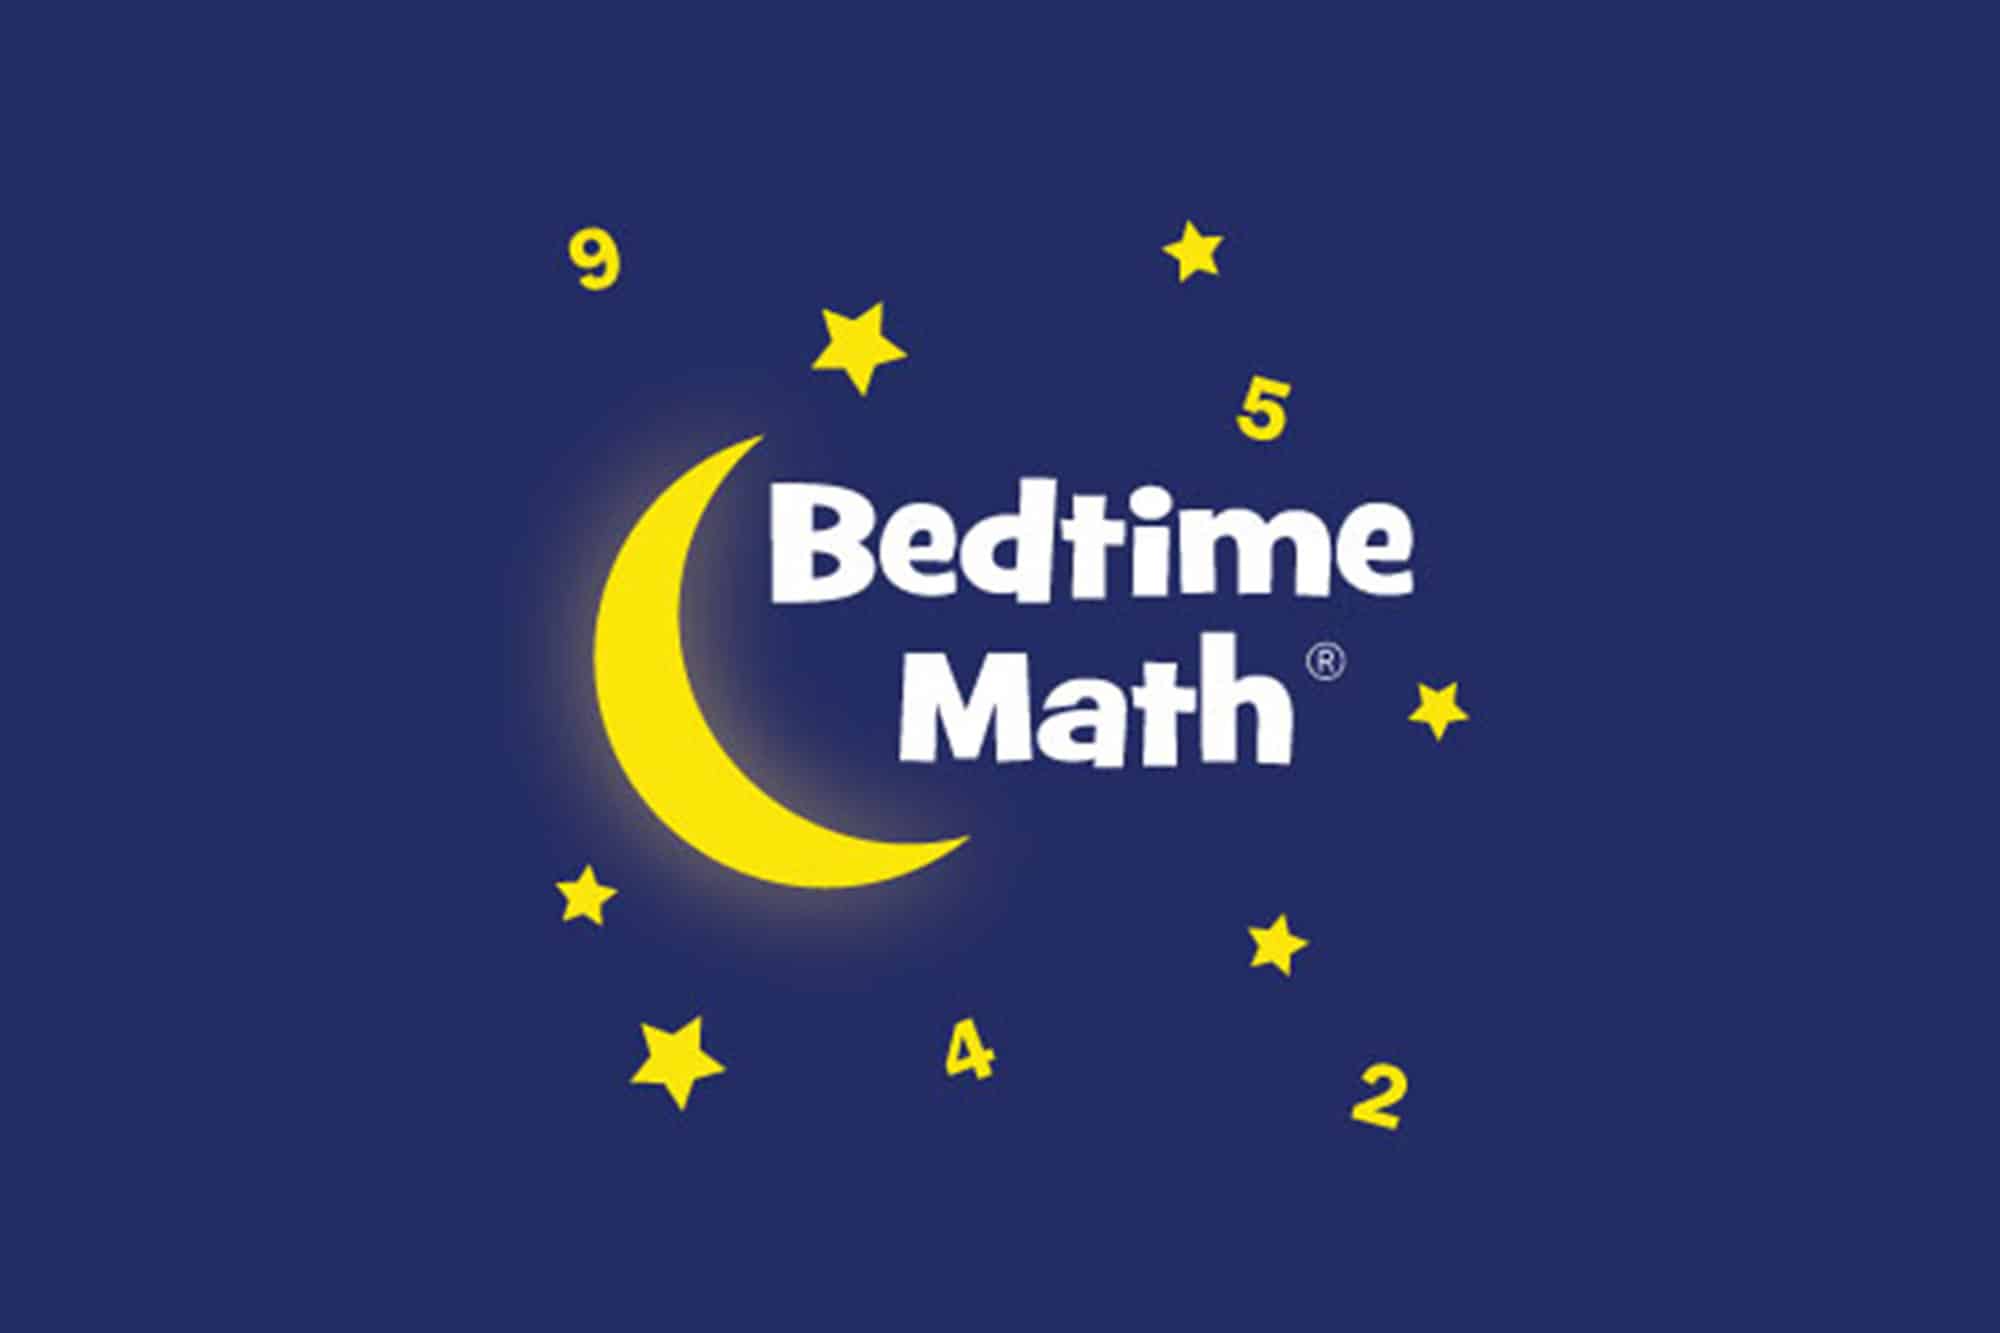 You are currently viewing Bedtime Math launches hands-on math experiences to support grades 3-5 teachers during COVID-19